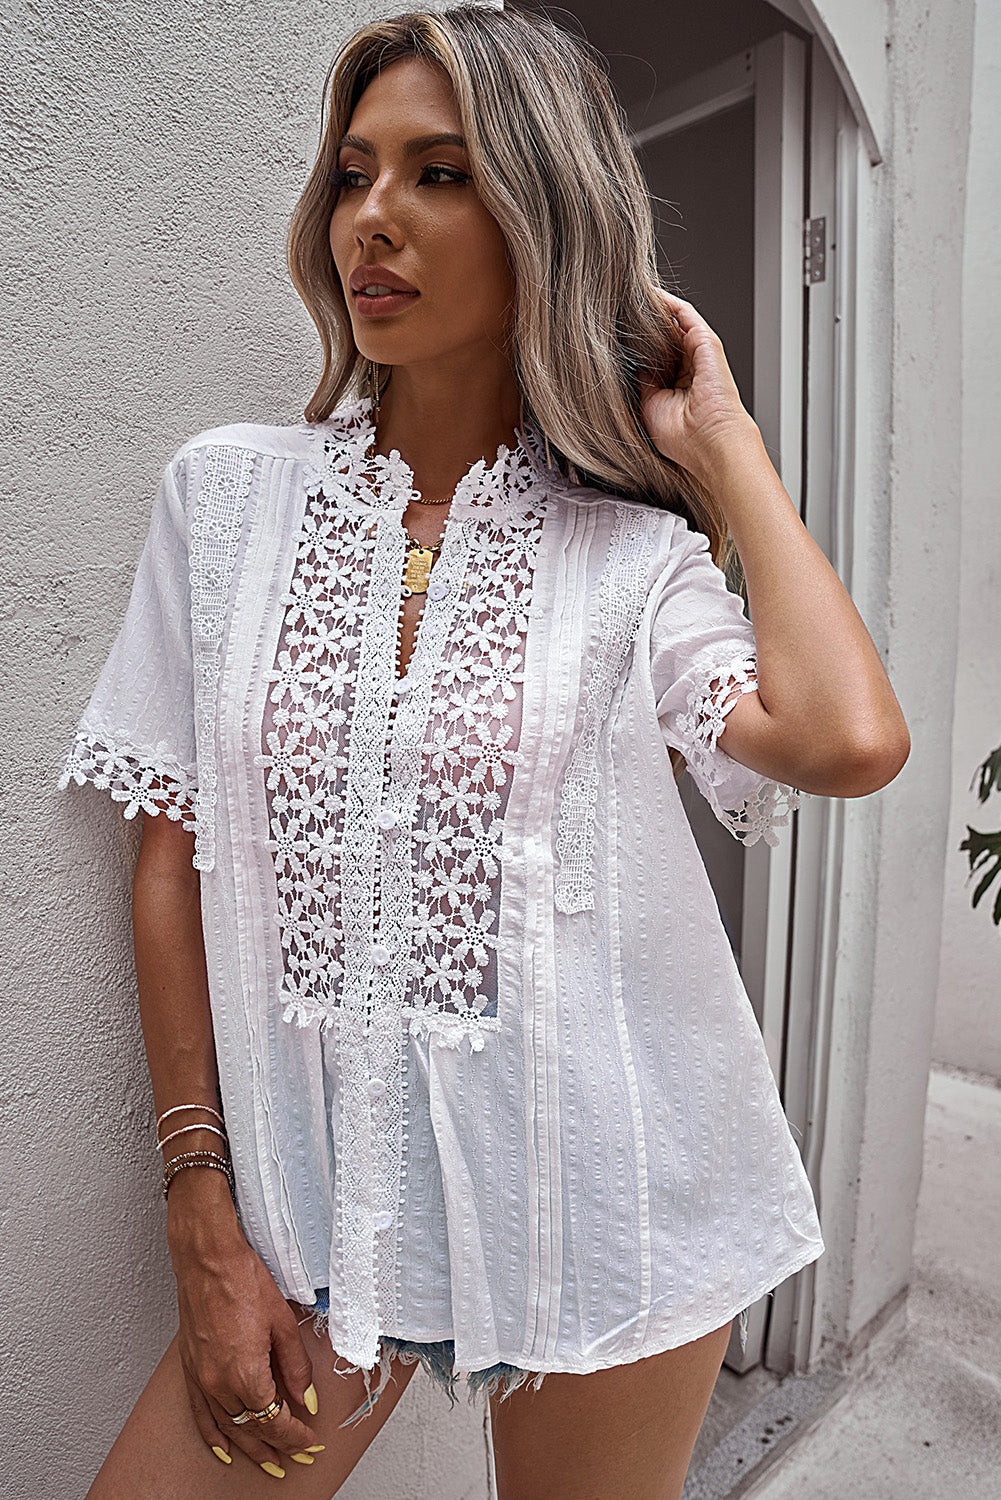 Summer Journey White Lace Top, SMALL & XL